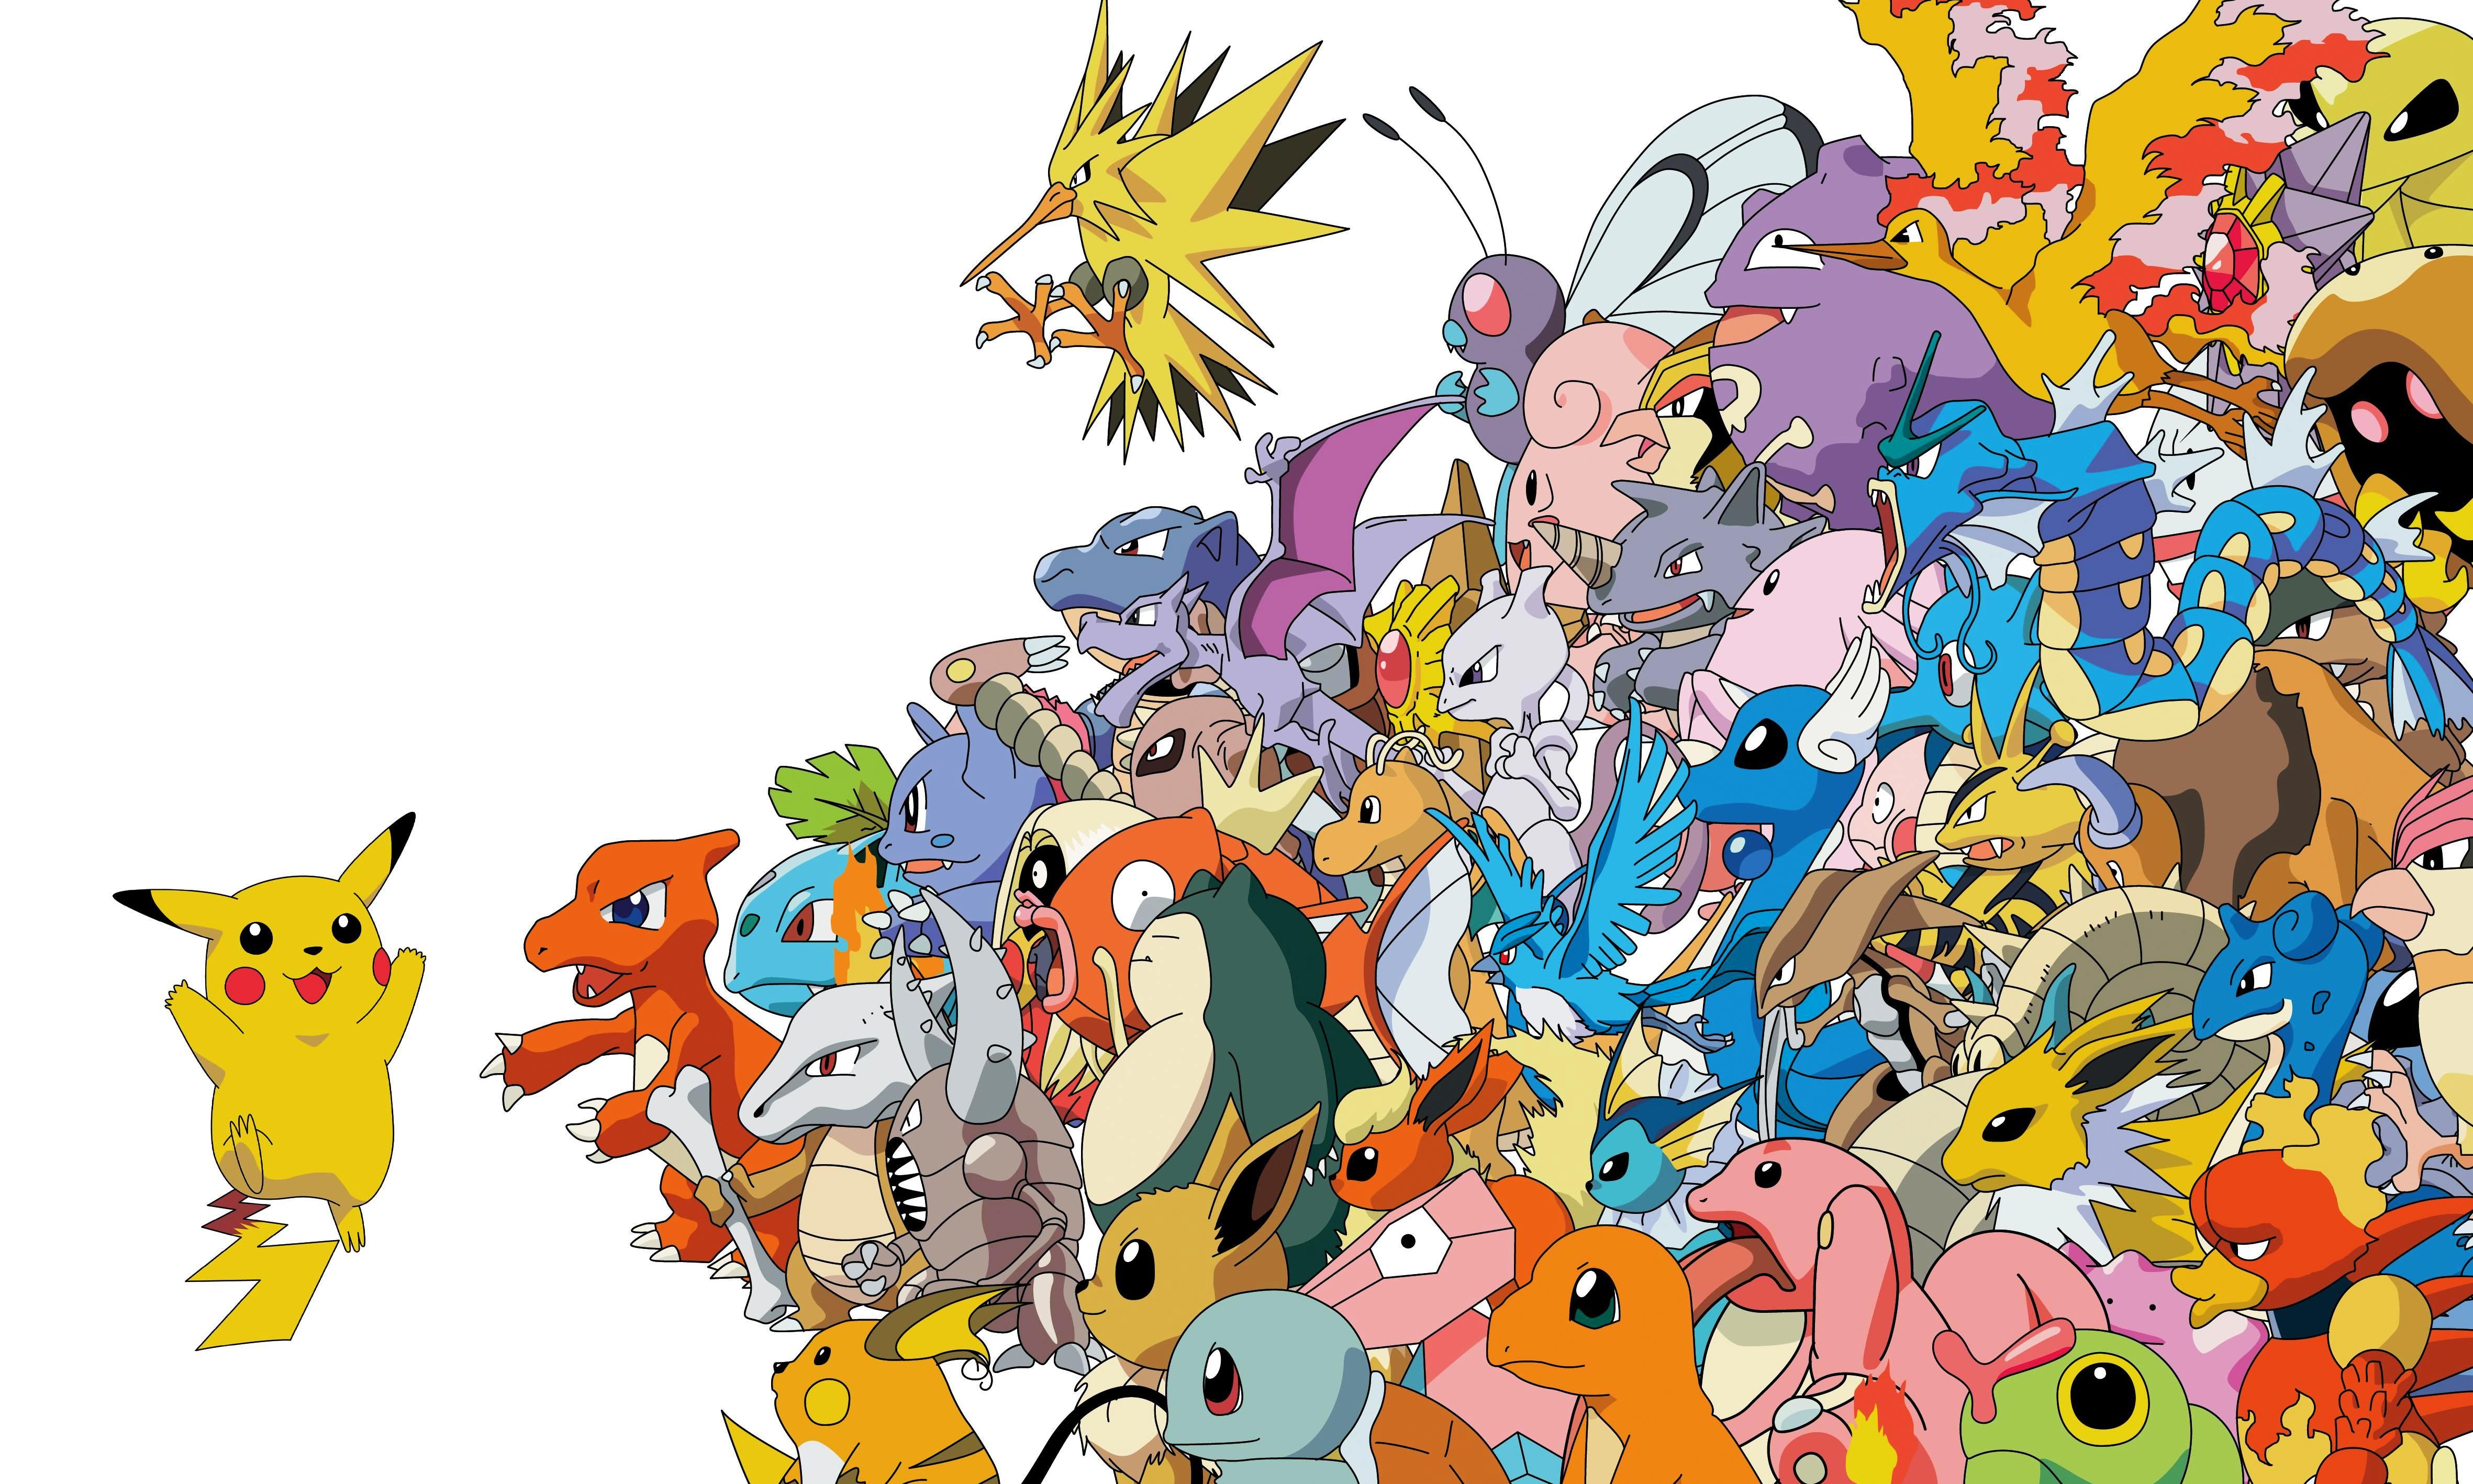 Image for Pokemon Presents set for Sunday, February 27 which is Pokemon Day